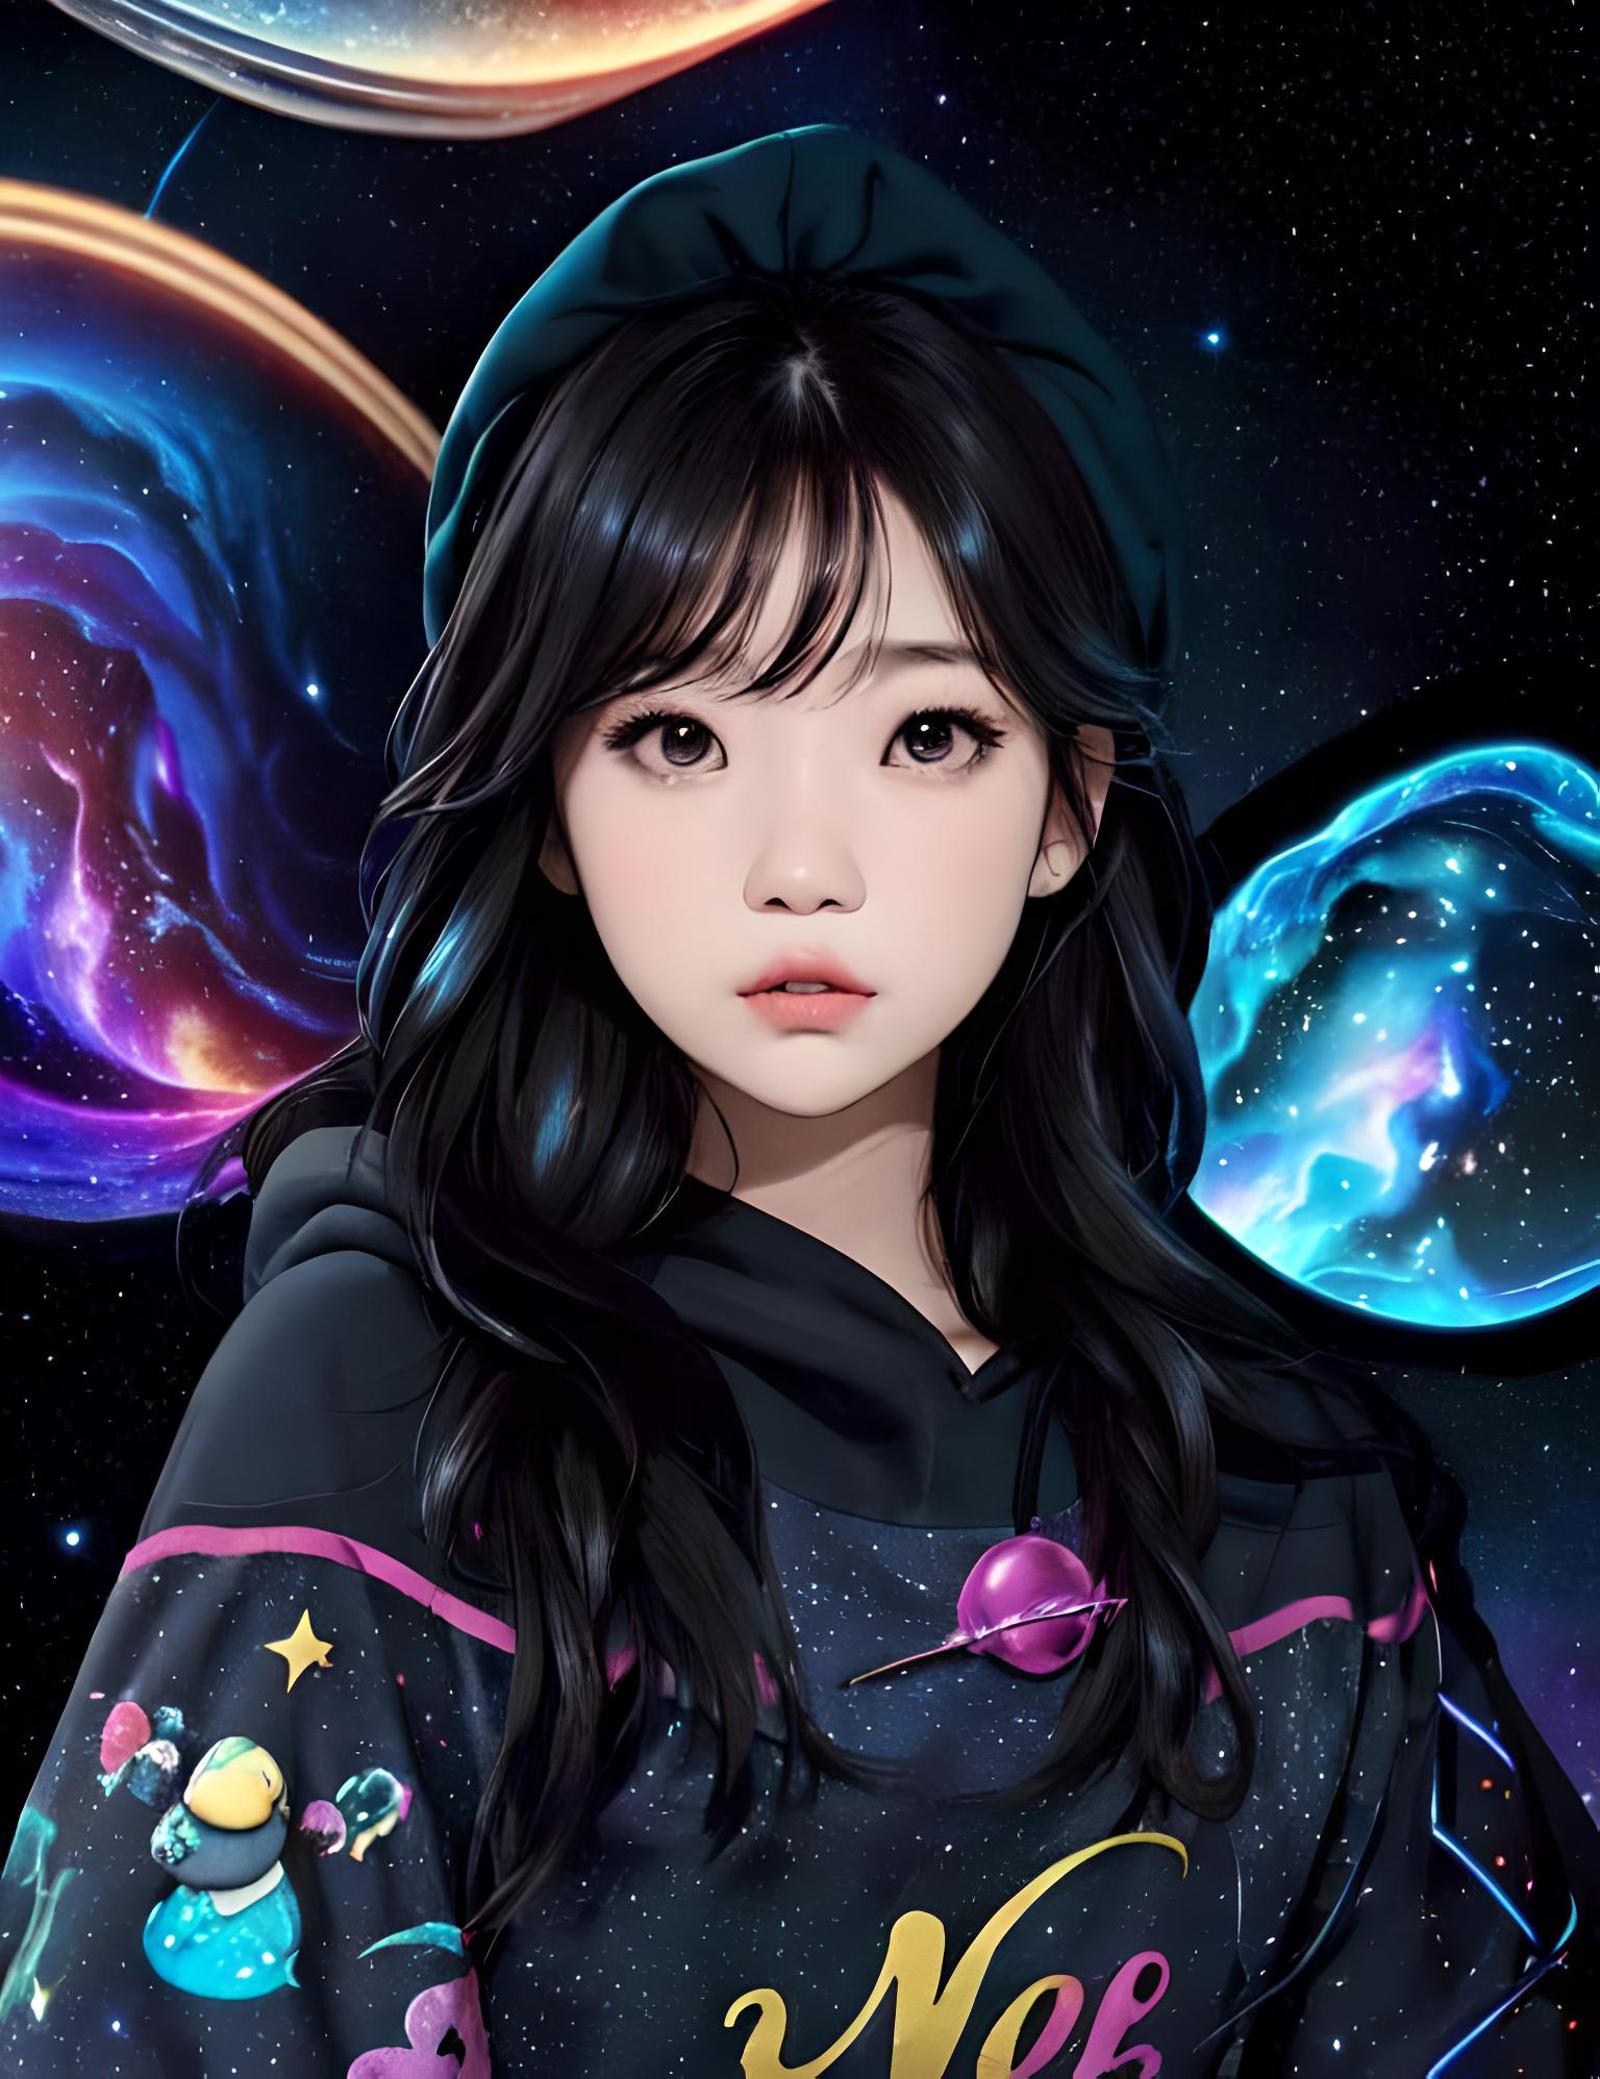 IU image by Monster_AI